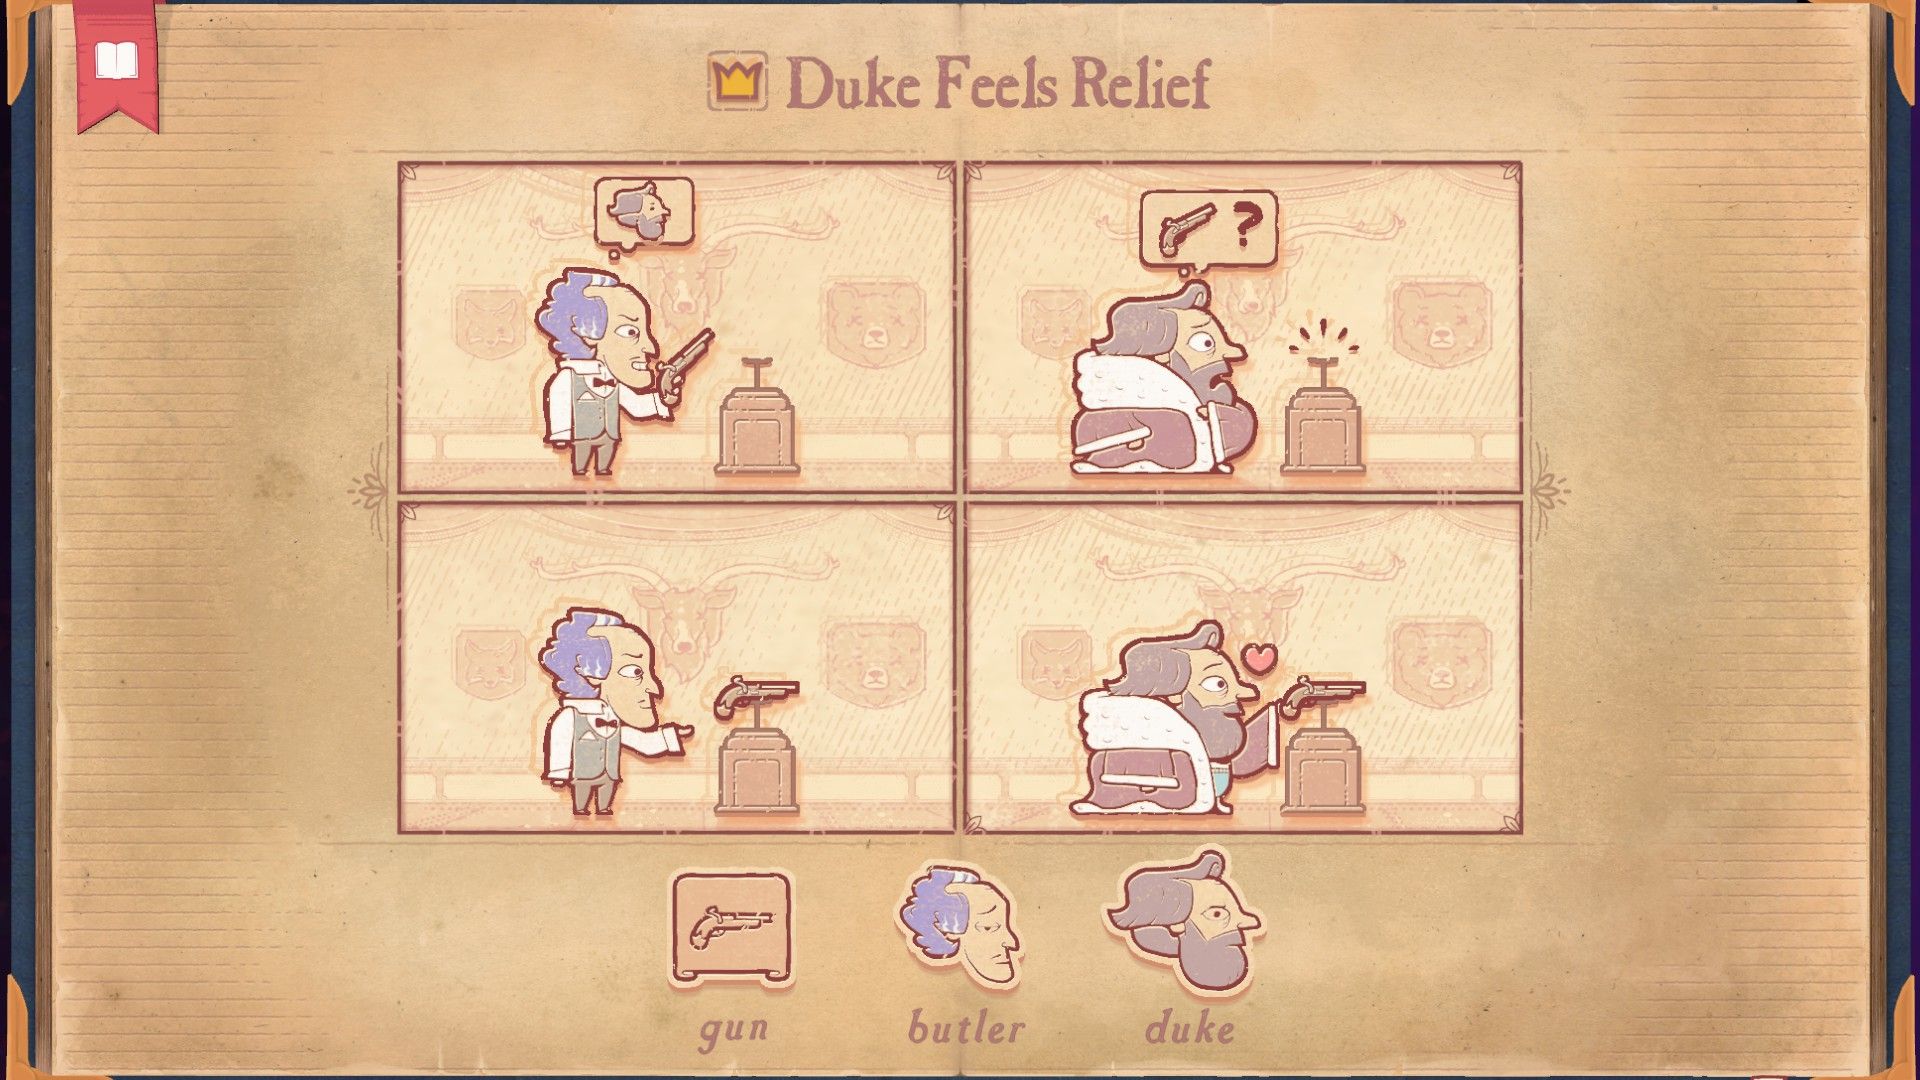 The solution for the Weapon section of Storyteller, showing the Duke feeling relief.